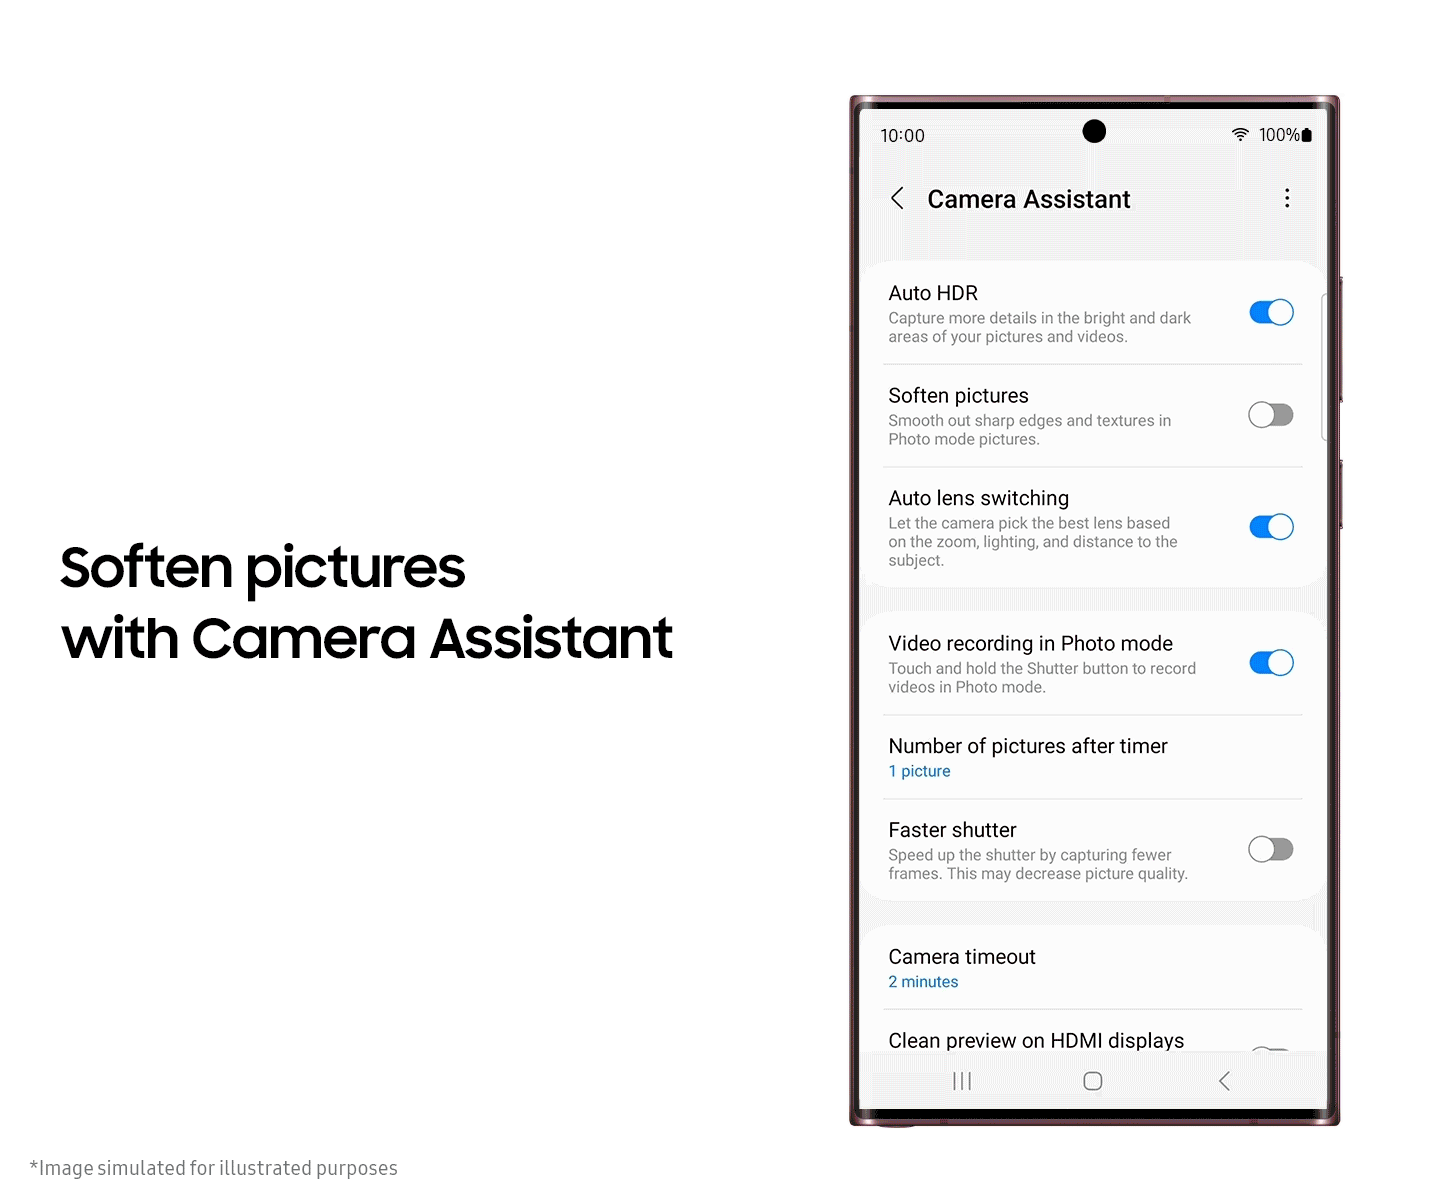 Soften pictures in Camera Assistant